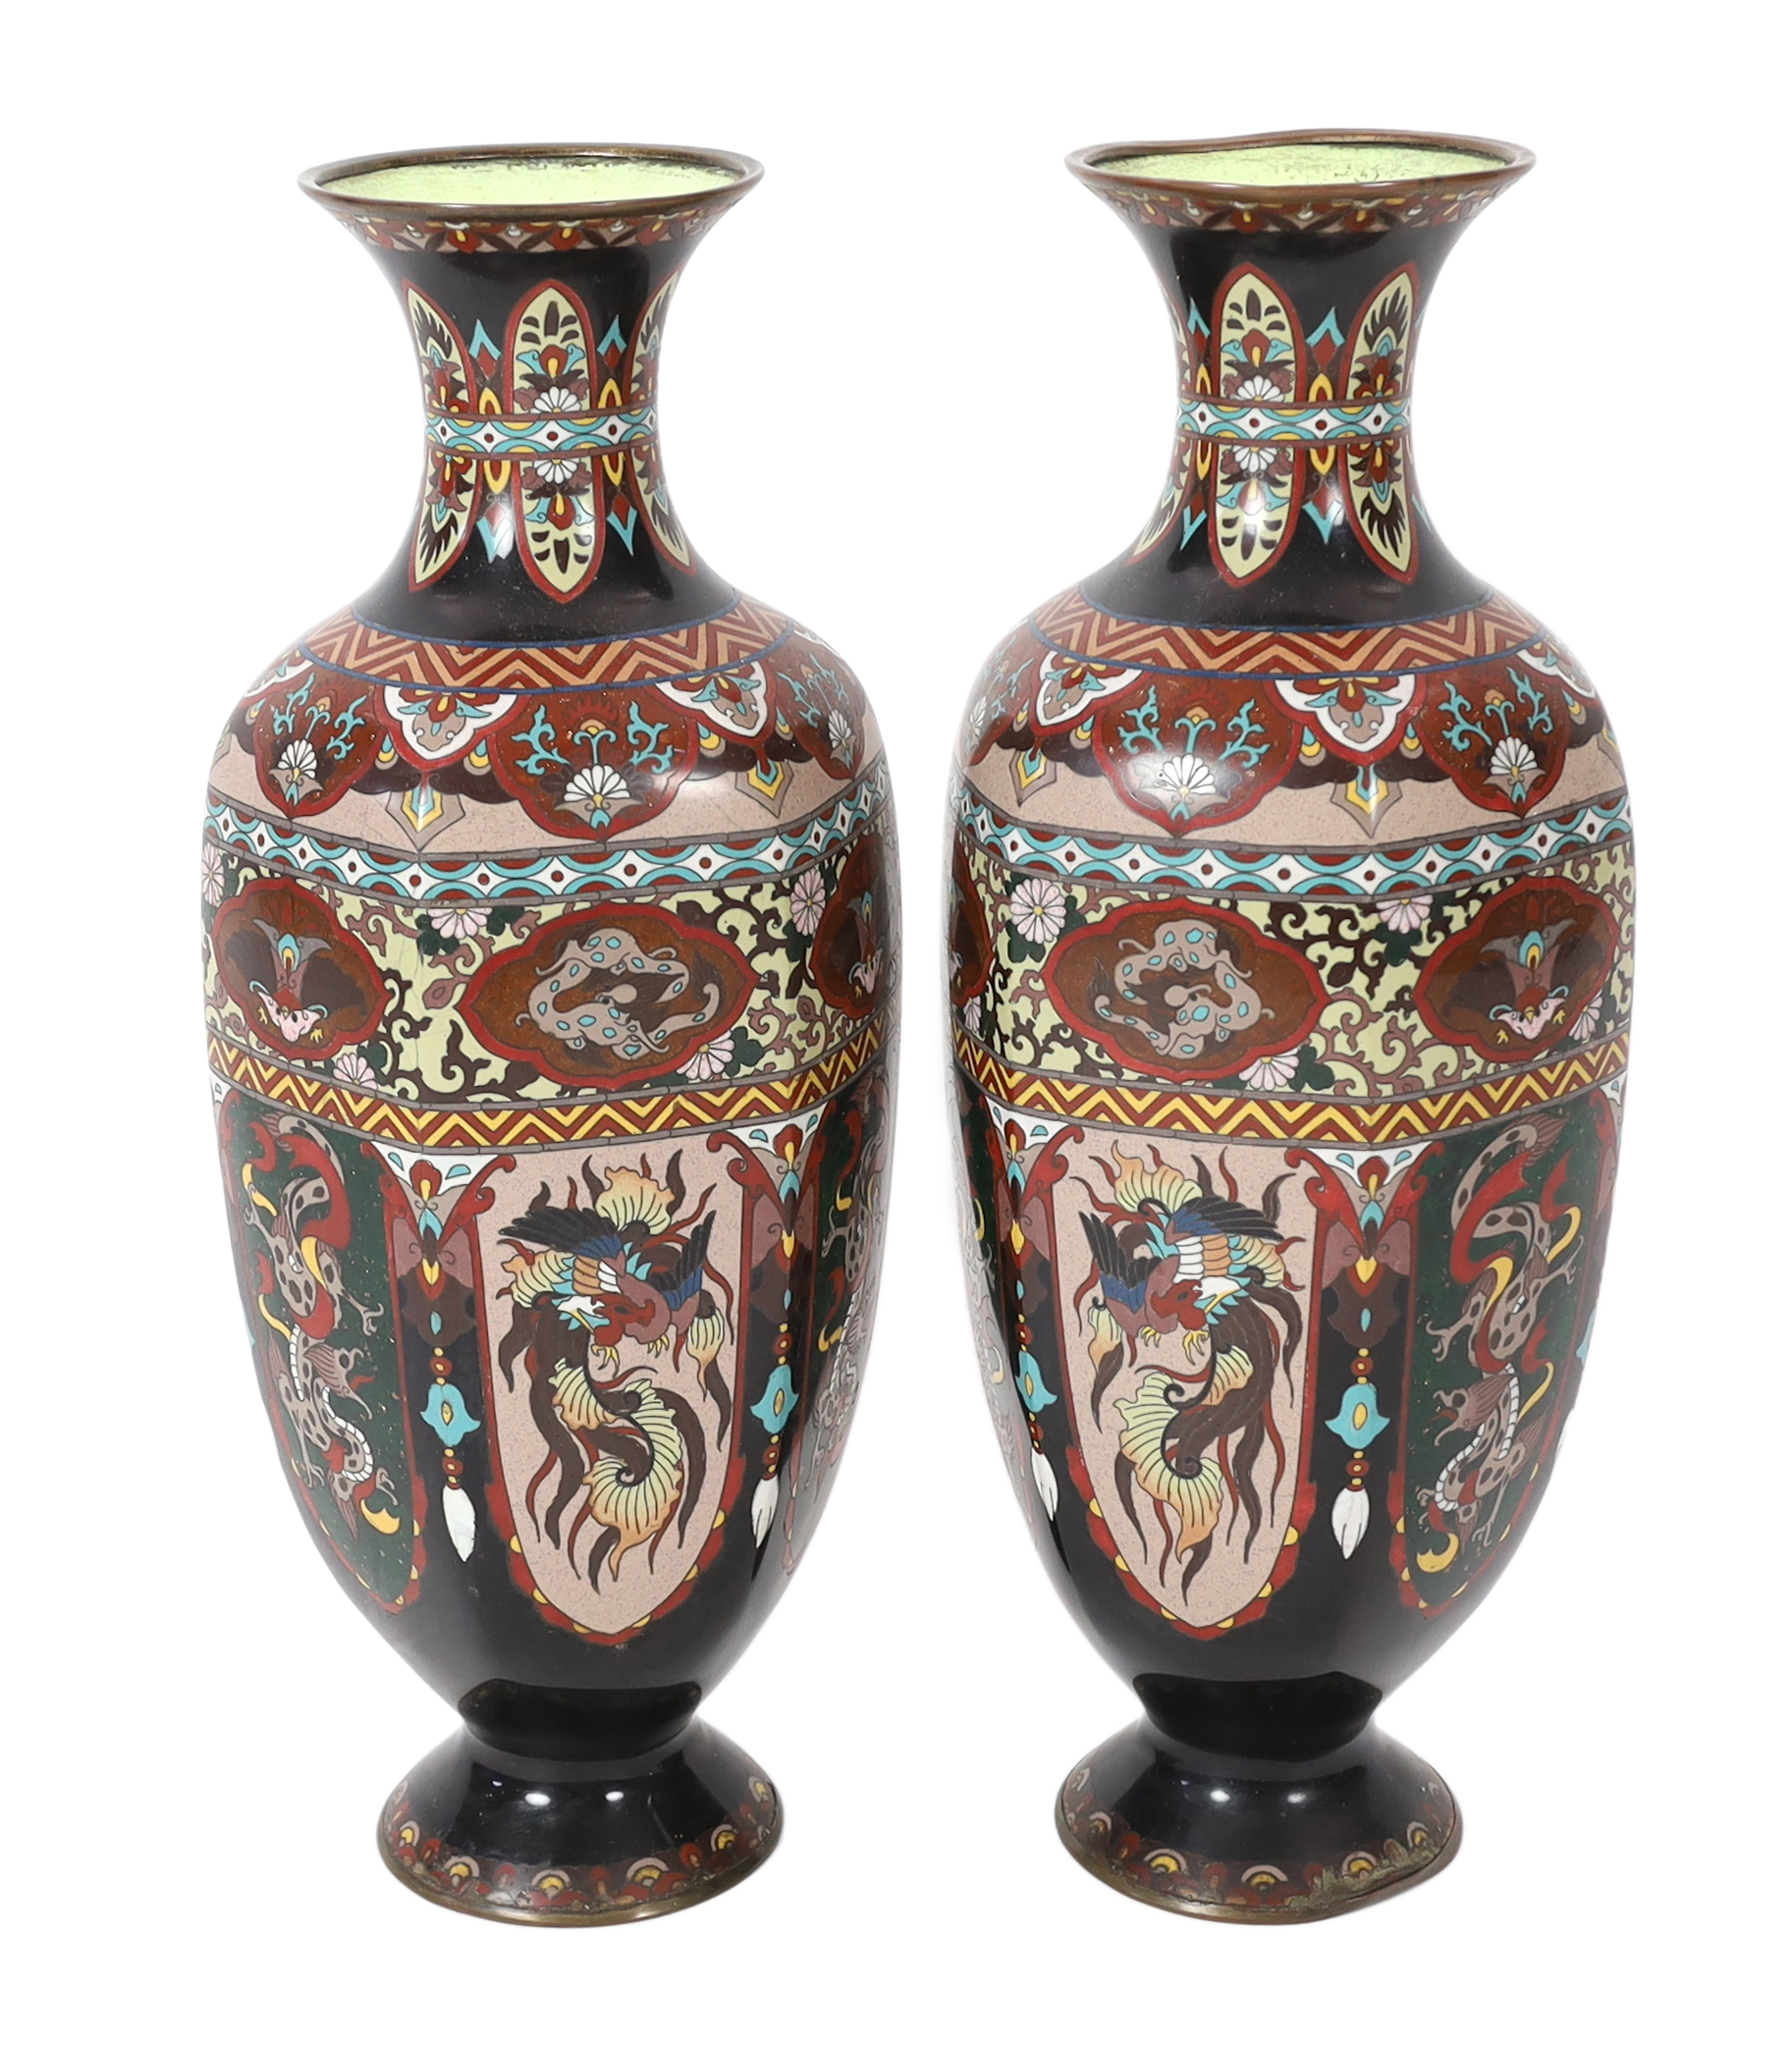 A pair of large Japanese Kyoto cloisonné enamel hexagonal baluster vases, early 20th century, minor damage